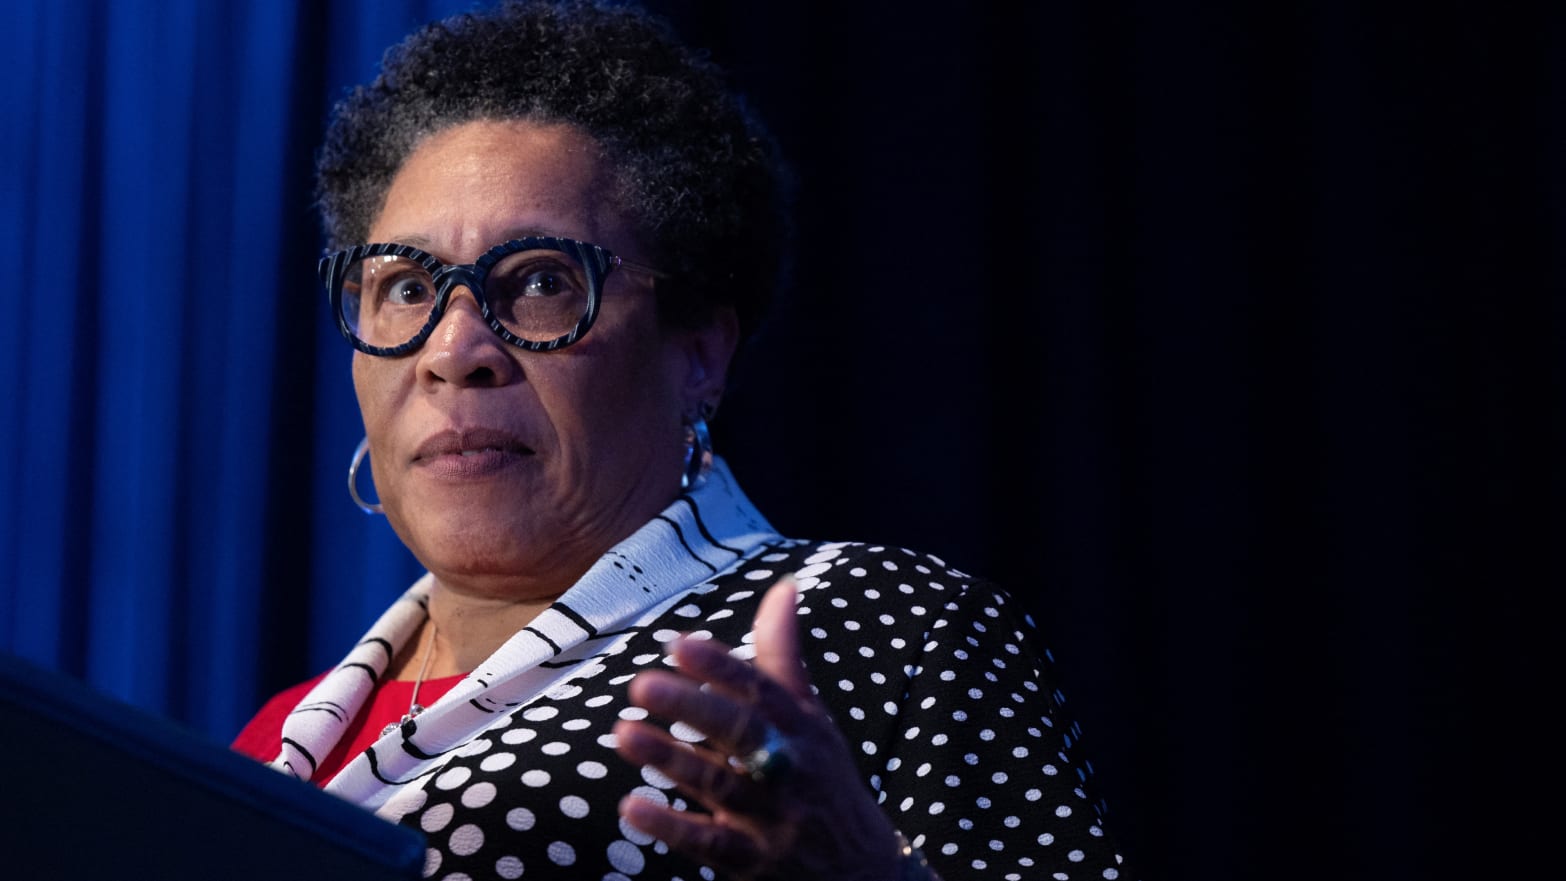 Marcia Fudge speaks on stage at an event in South Carolina.